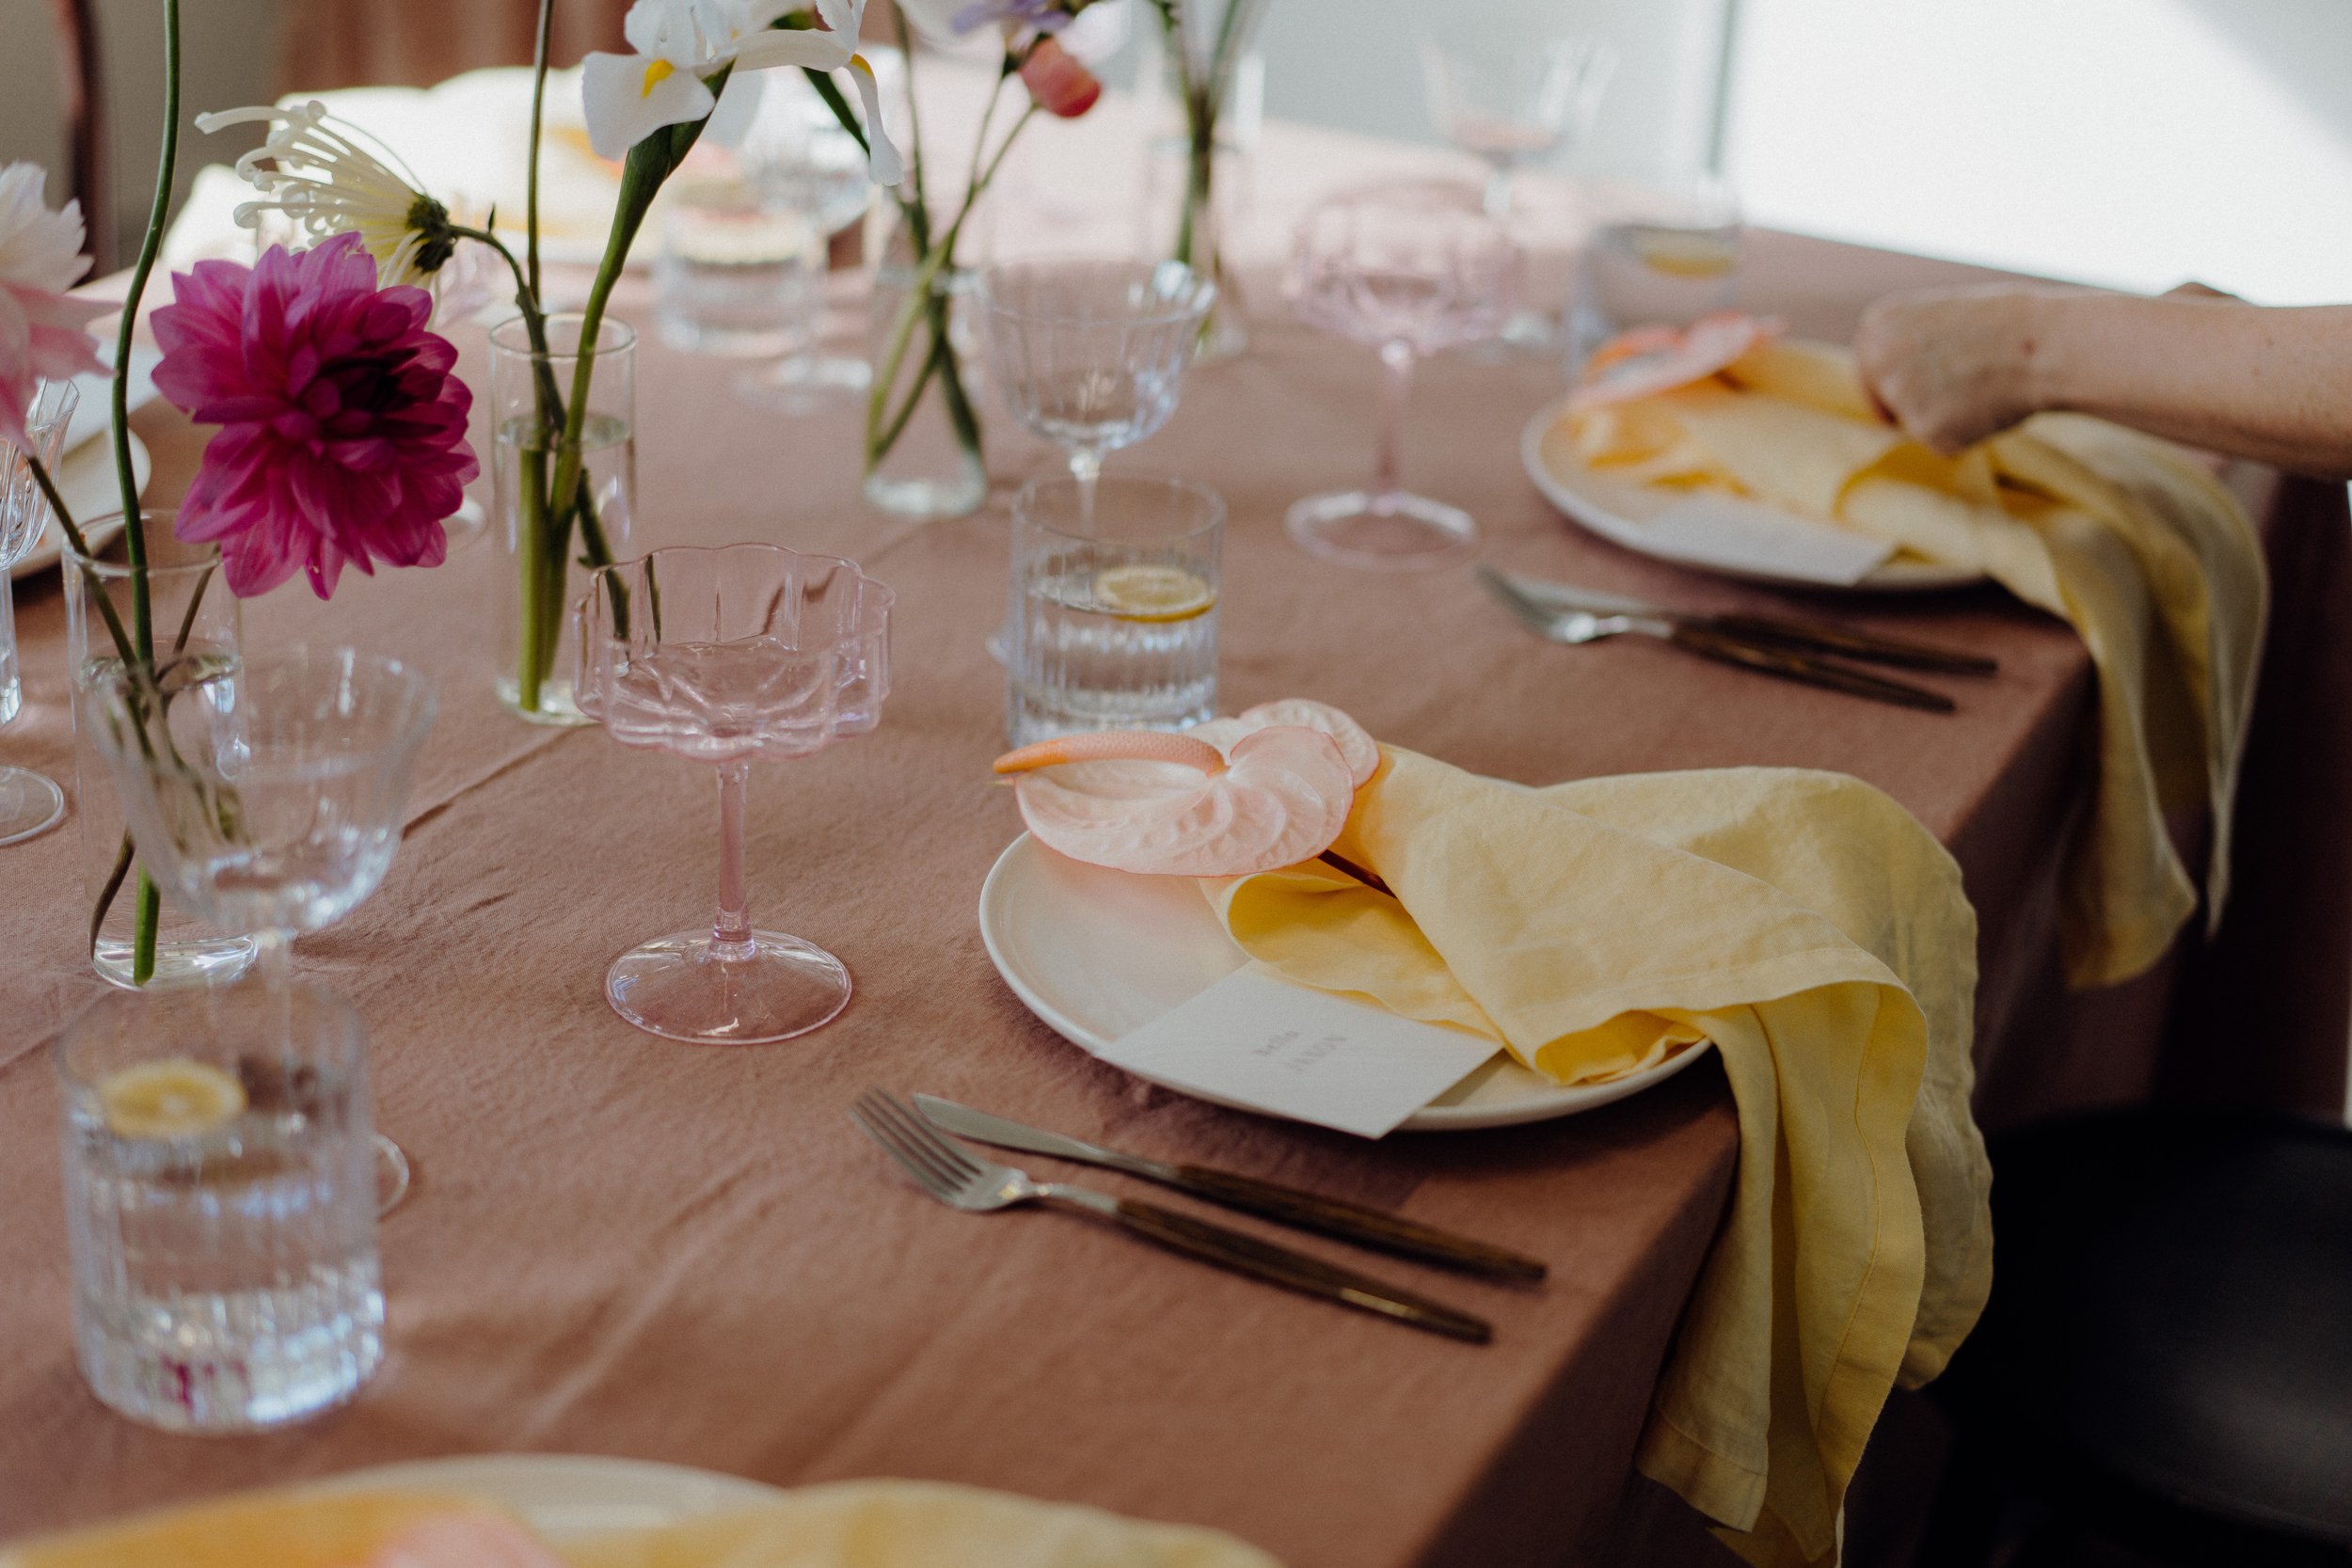 Berry Tablecloths with Honeysuckle Napkins